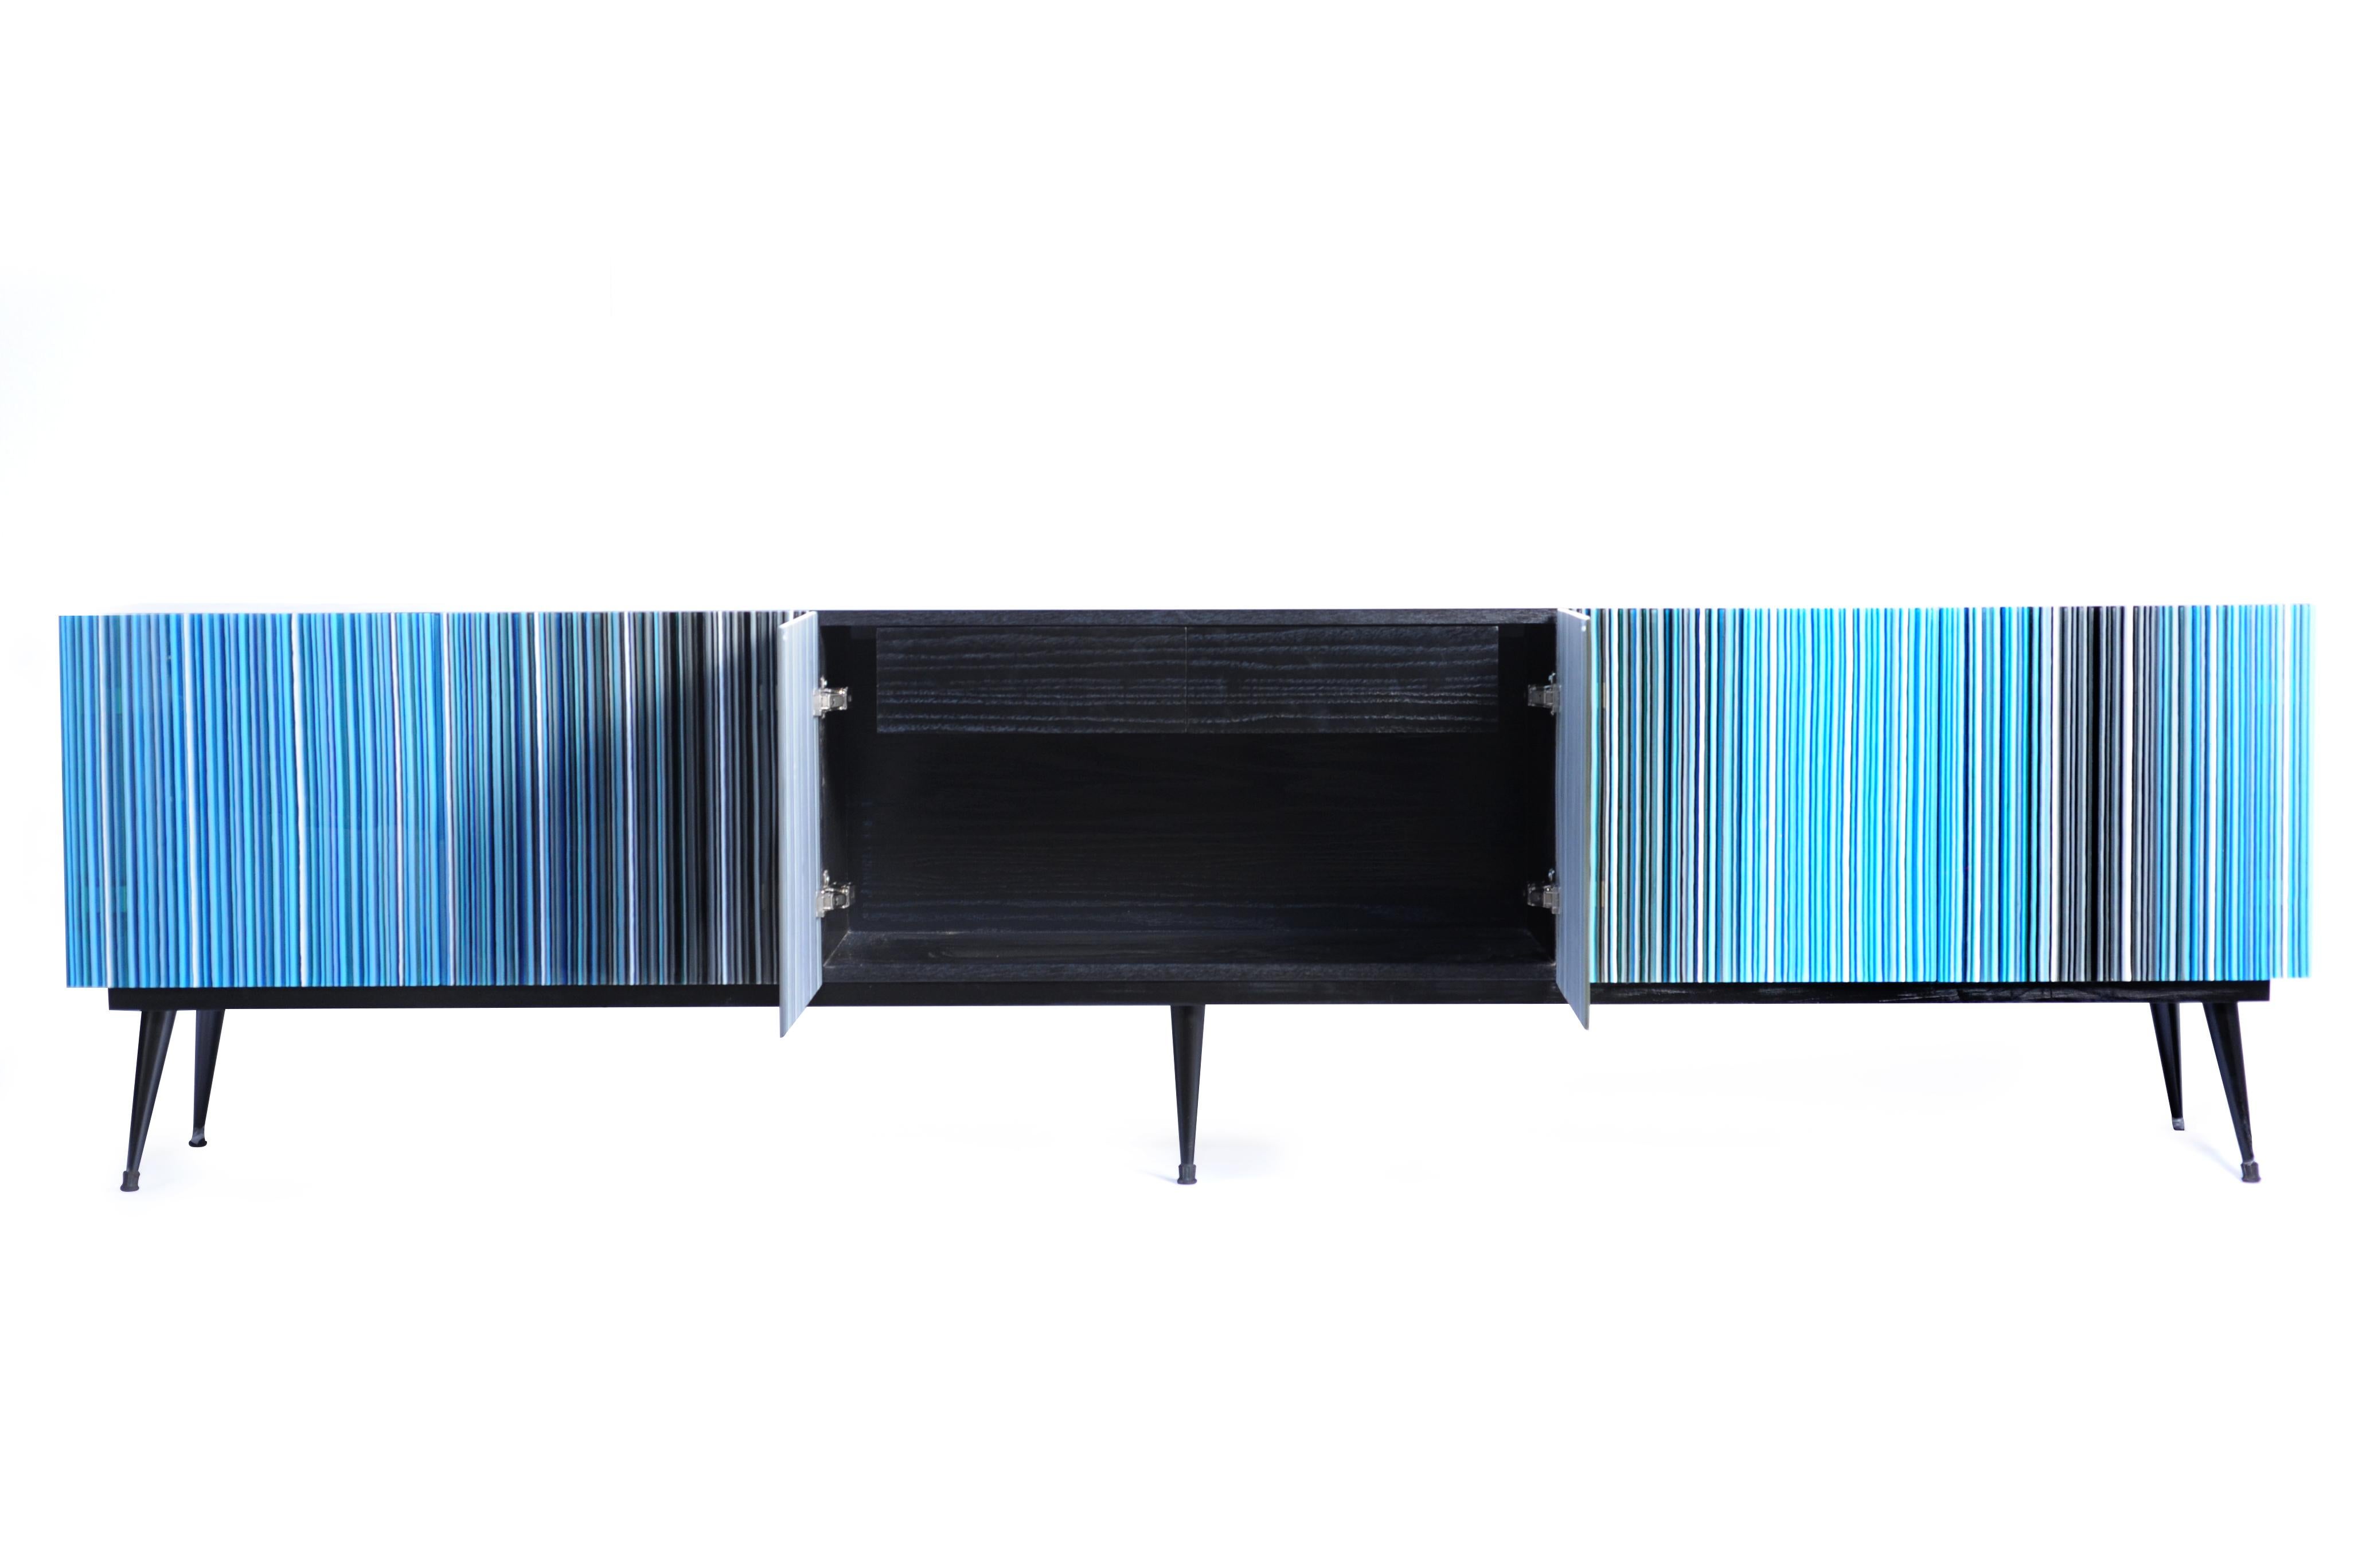 Credenza designed by Orfeo Quagliata in collaboration with Taracea Furniture. An object of fused glass created with the exclusive barcode technique. The Buff-Hey´s retro design mixed with designer's exceptional glass expertise put together a cutting